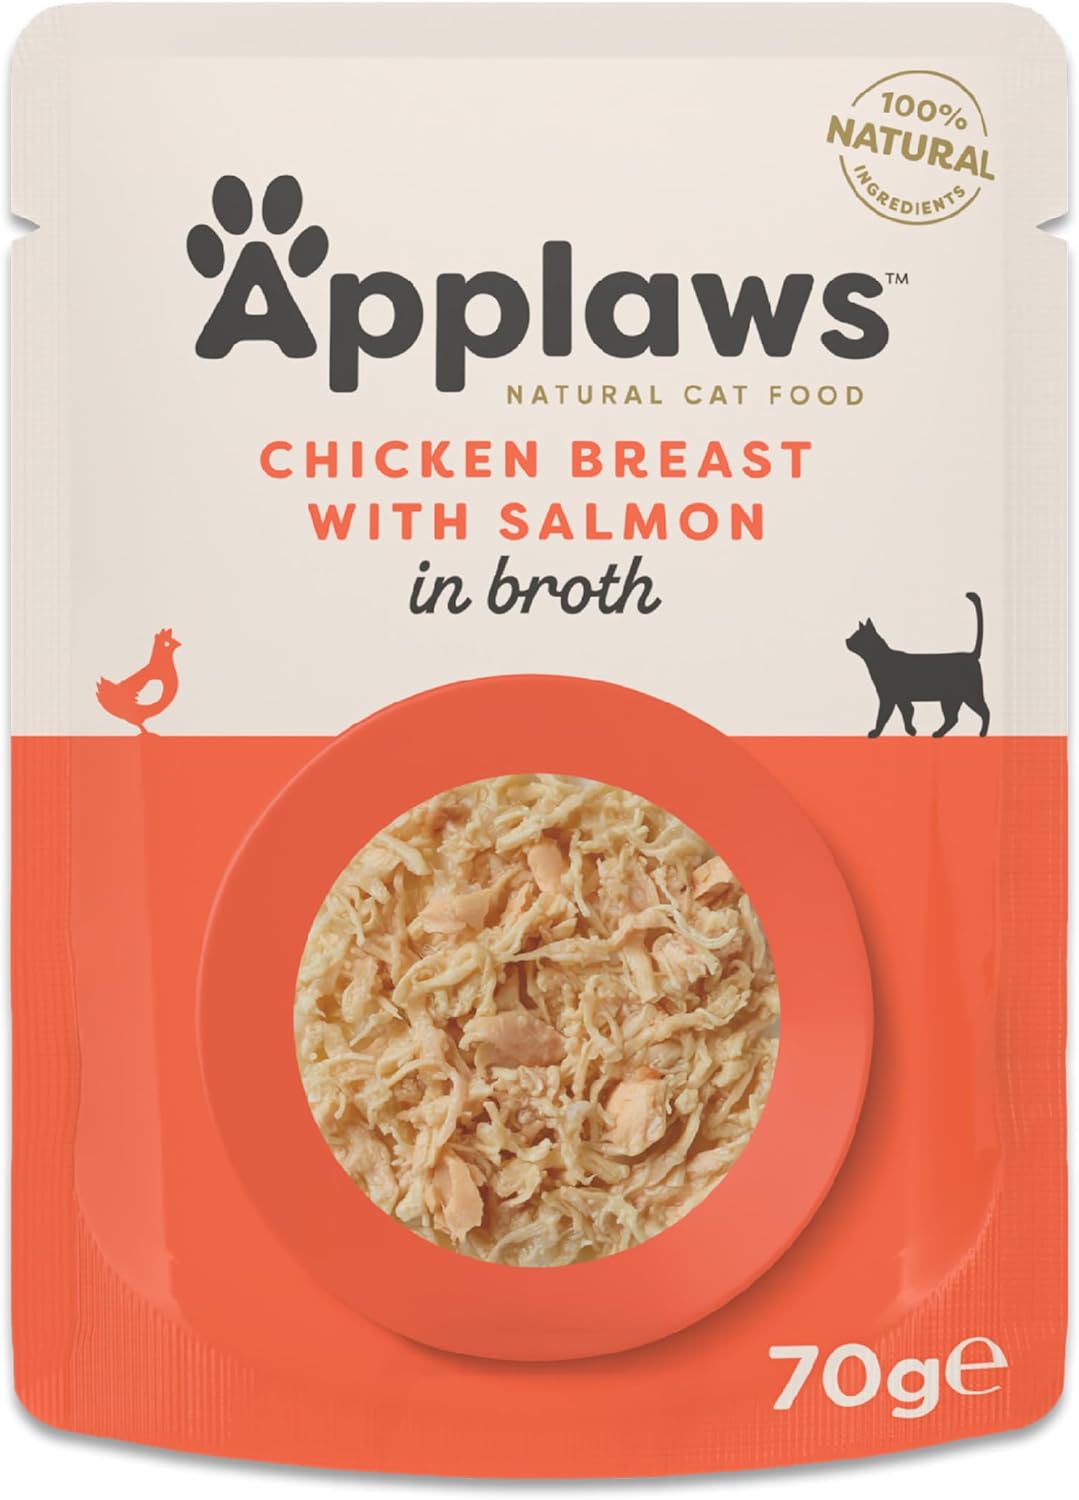 Applaws 100% Natural Adult Wet Cat Food, Chicken with Salmon in Broth 70g Pouch, (12 x 70 g Pouches)